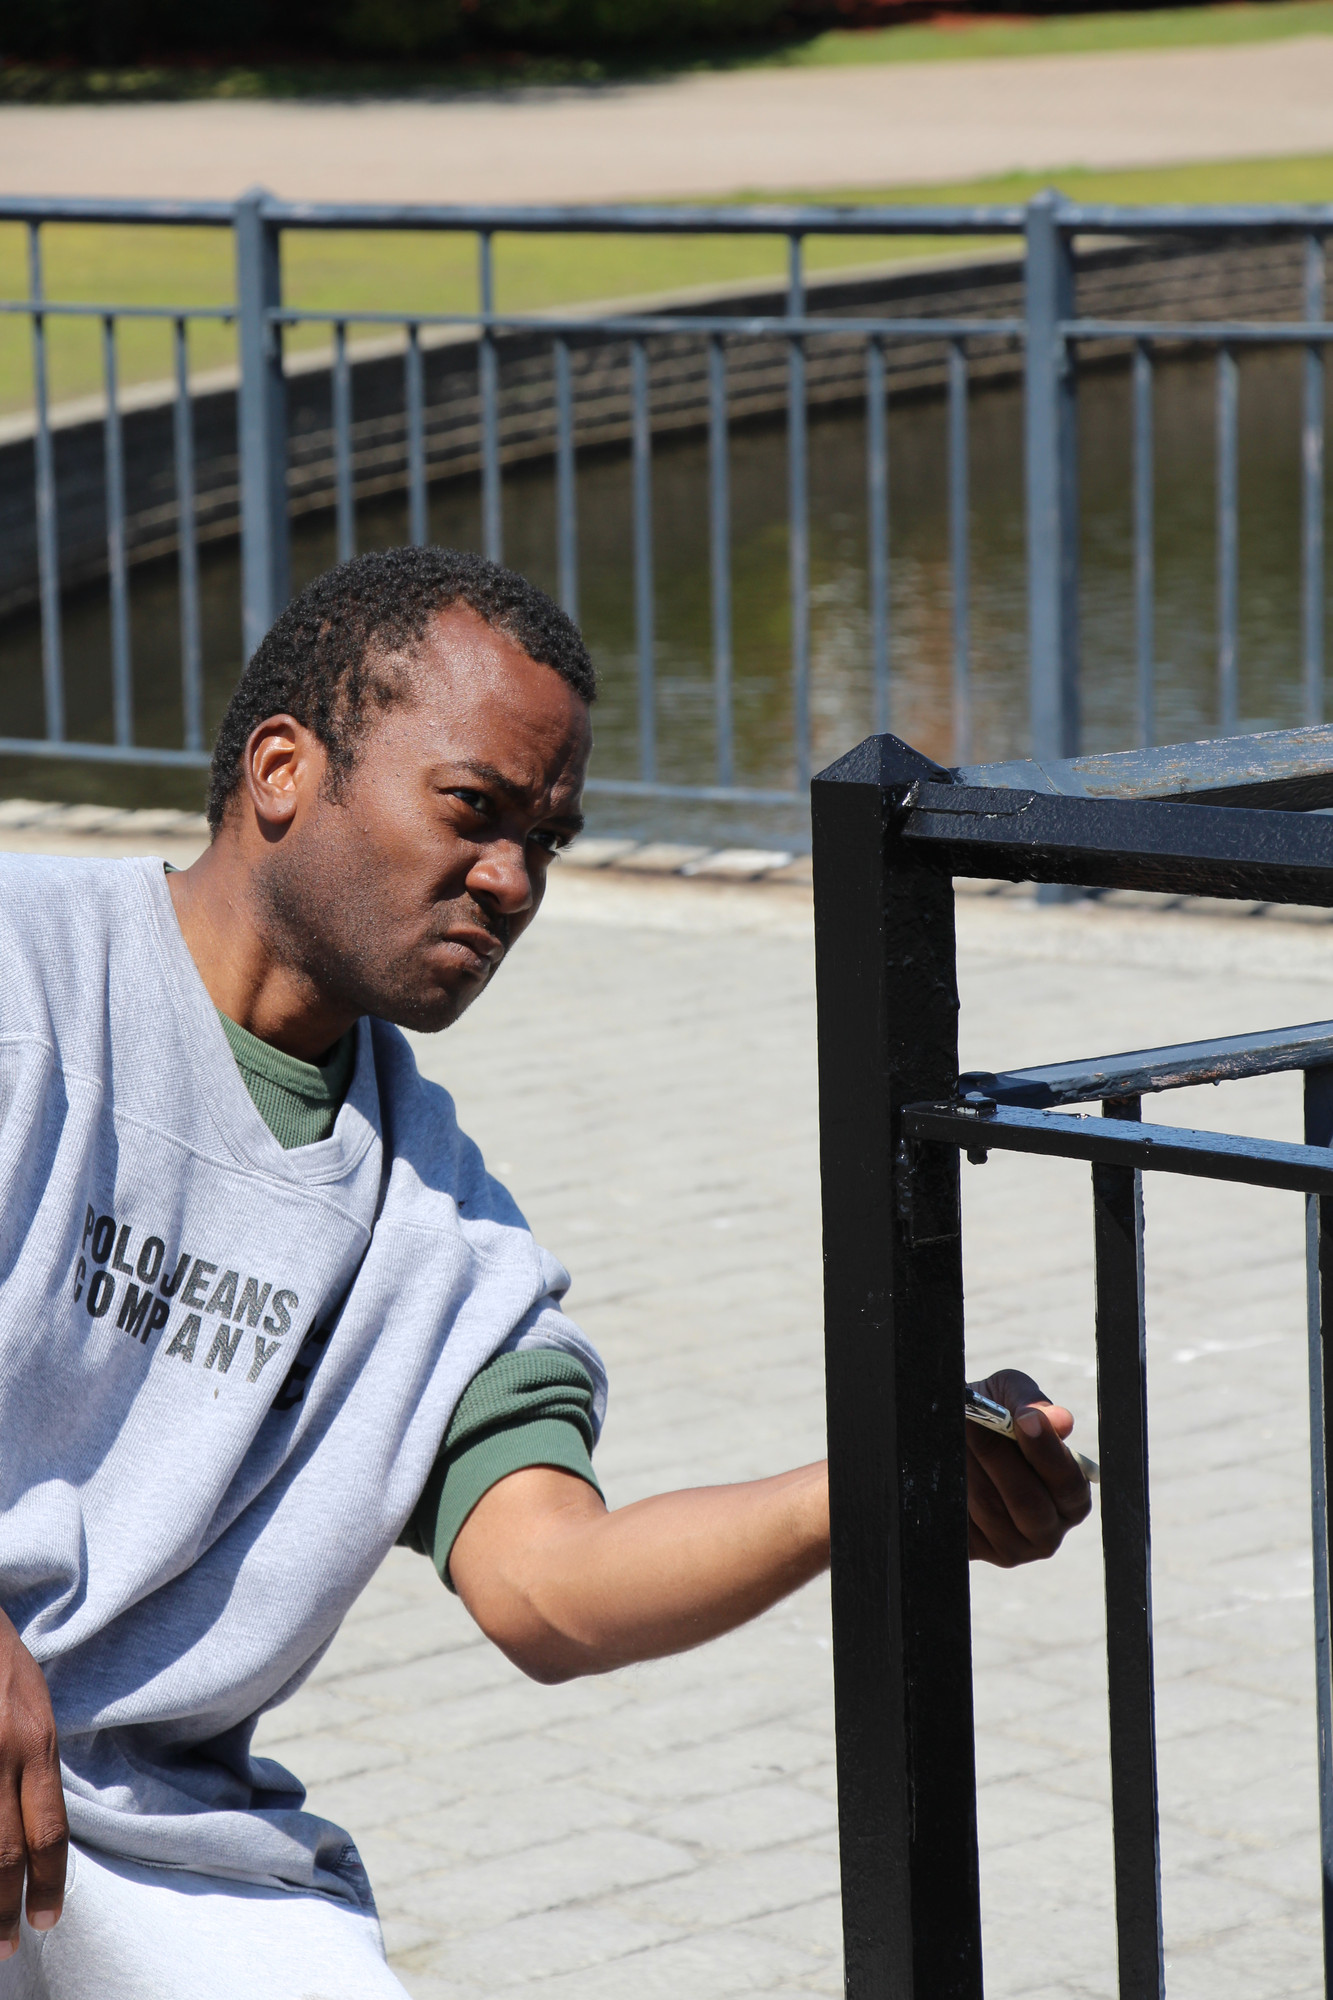 Richard Moore helped out at Milburn Pond Park. He painted the railing along the pond, giving it a needed face lift.